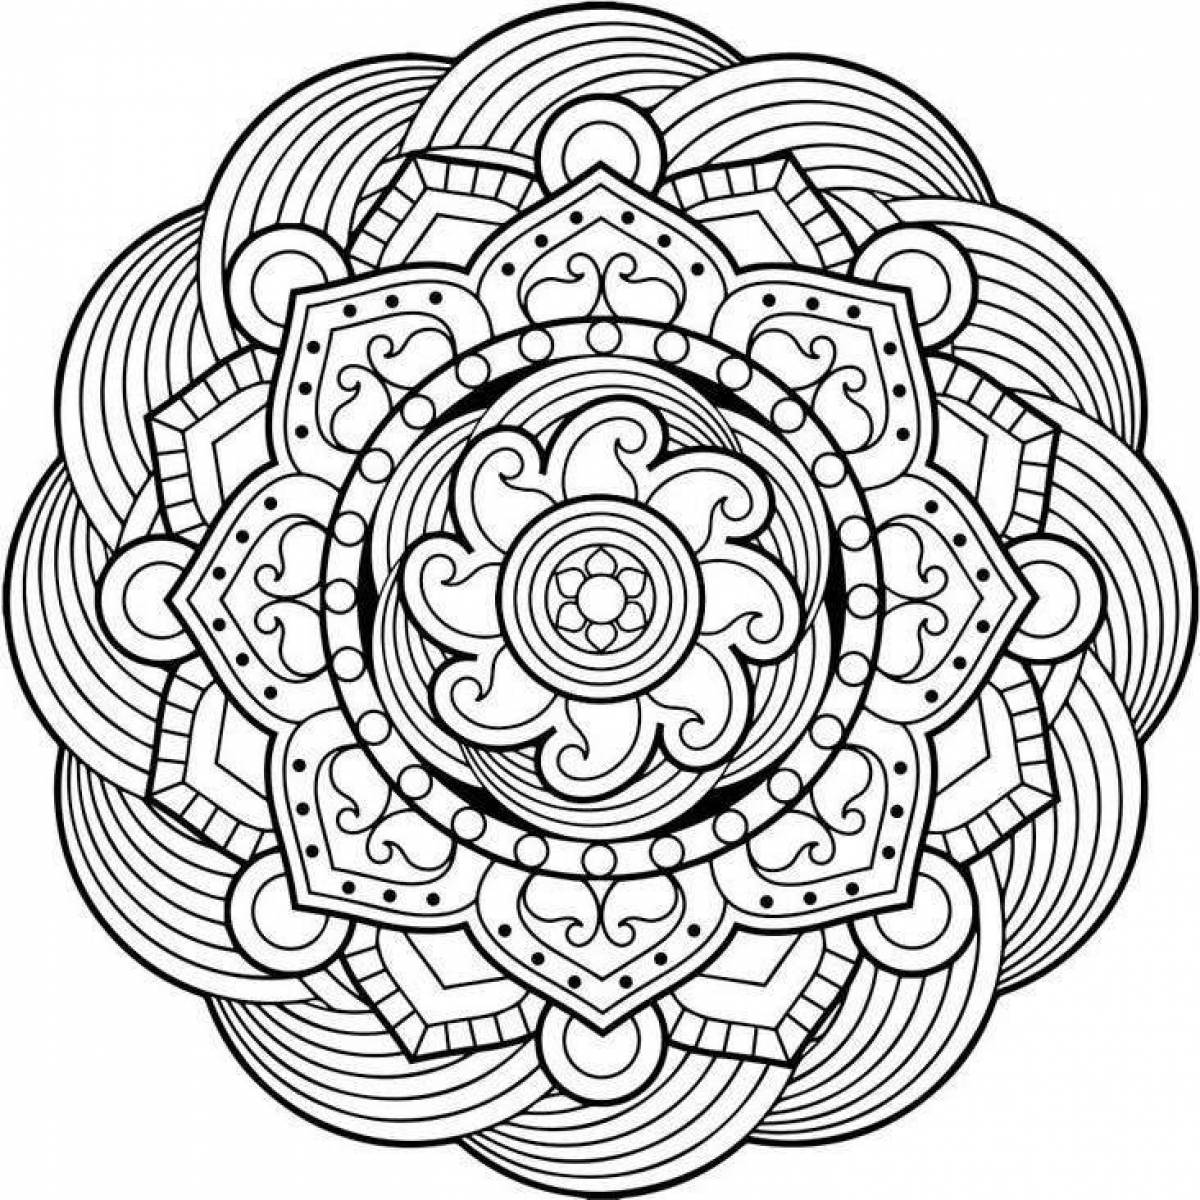 Peaceful mantra coloring pages